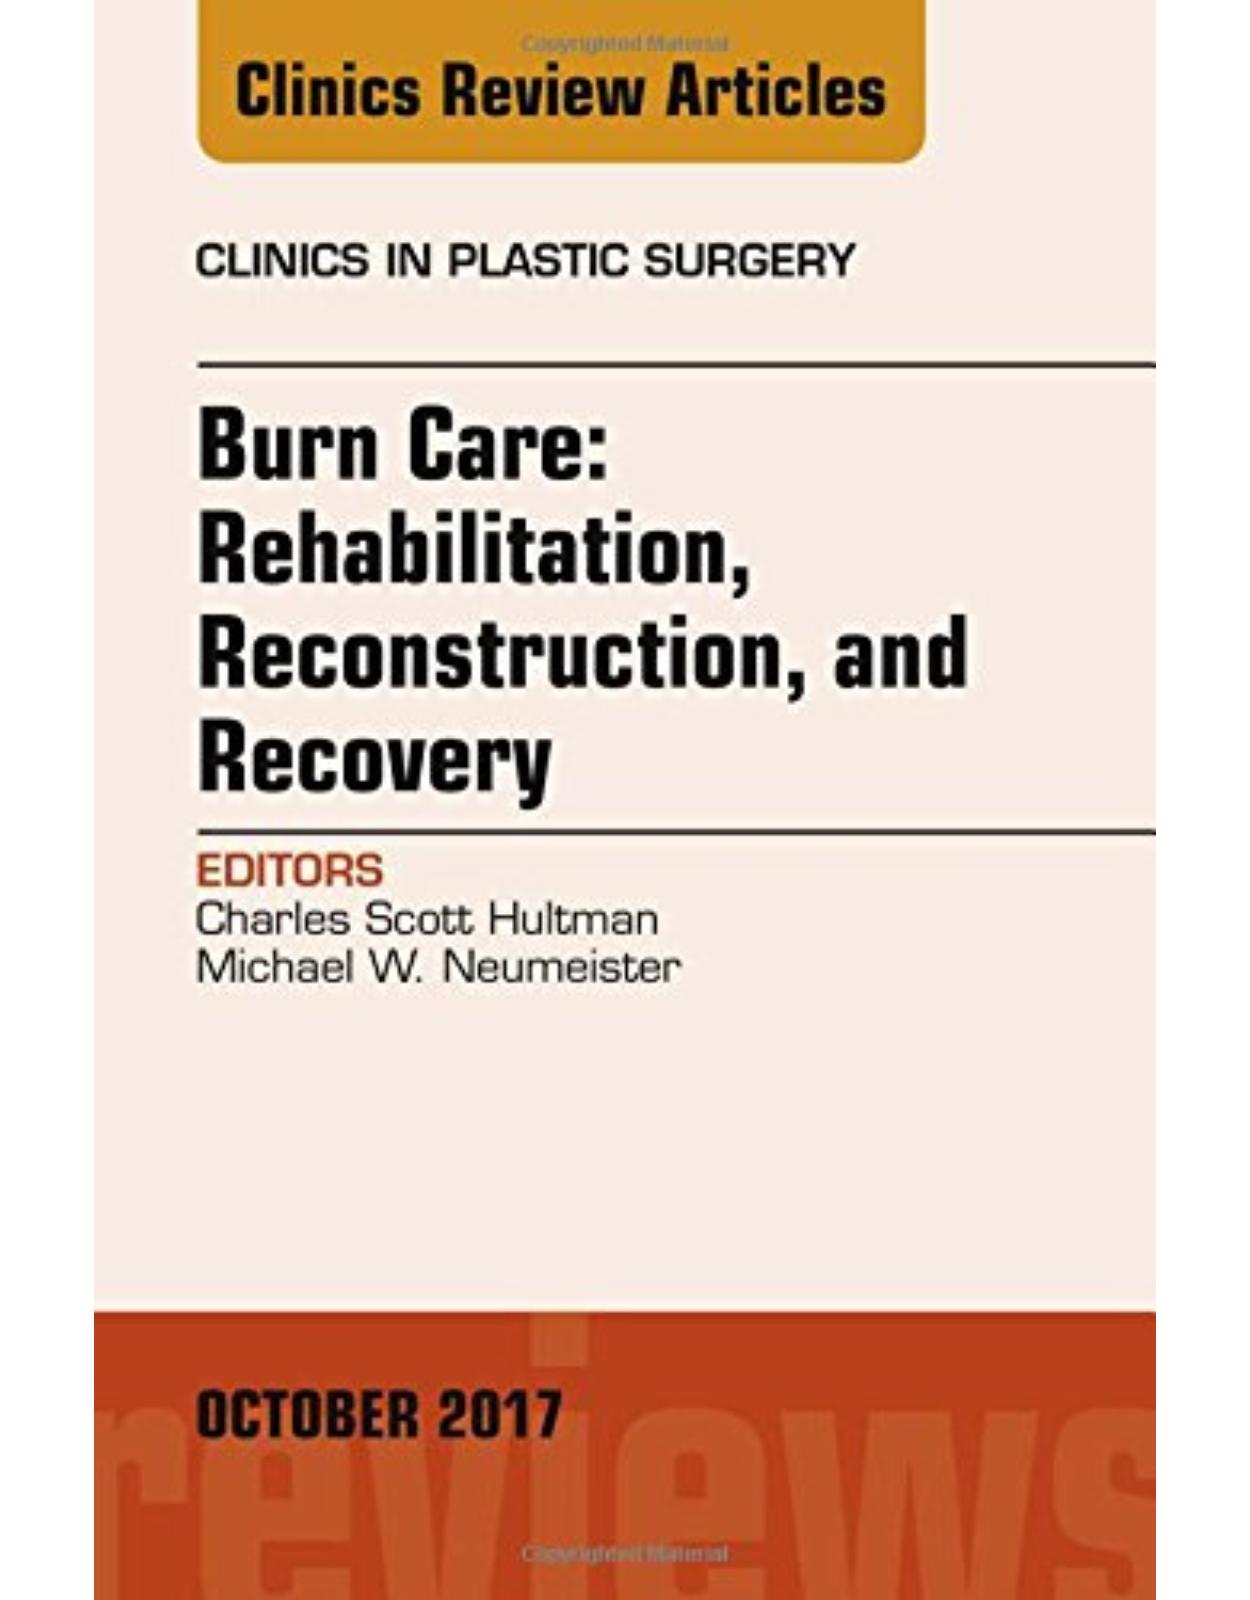 Burn Care: Reconstruction, Rehabilitation, and Recovery, An Issue of Clinics in Plastic Surgery, Volume 44-4